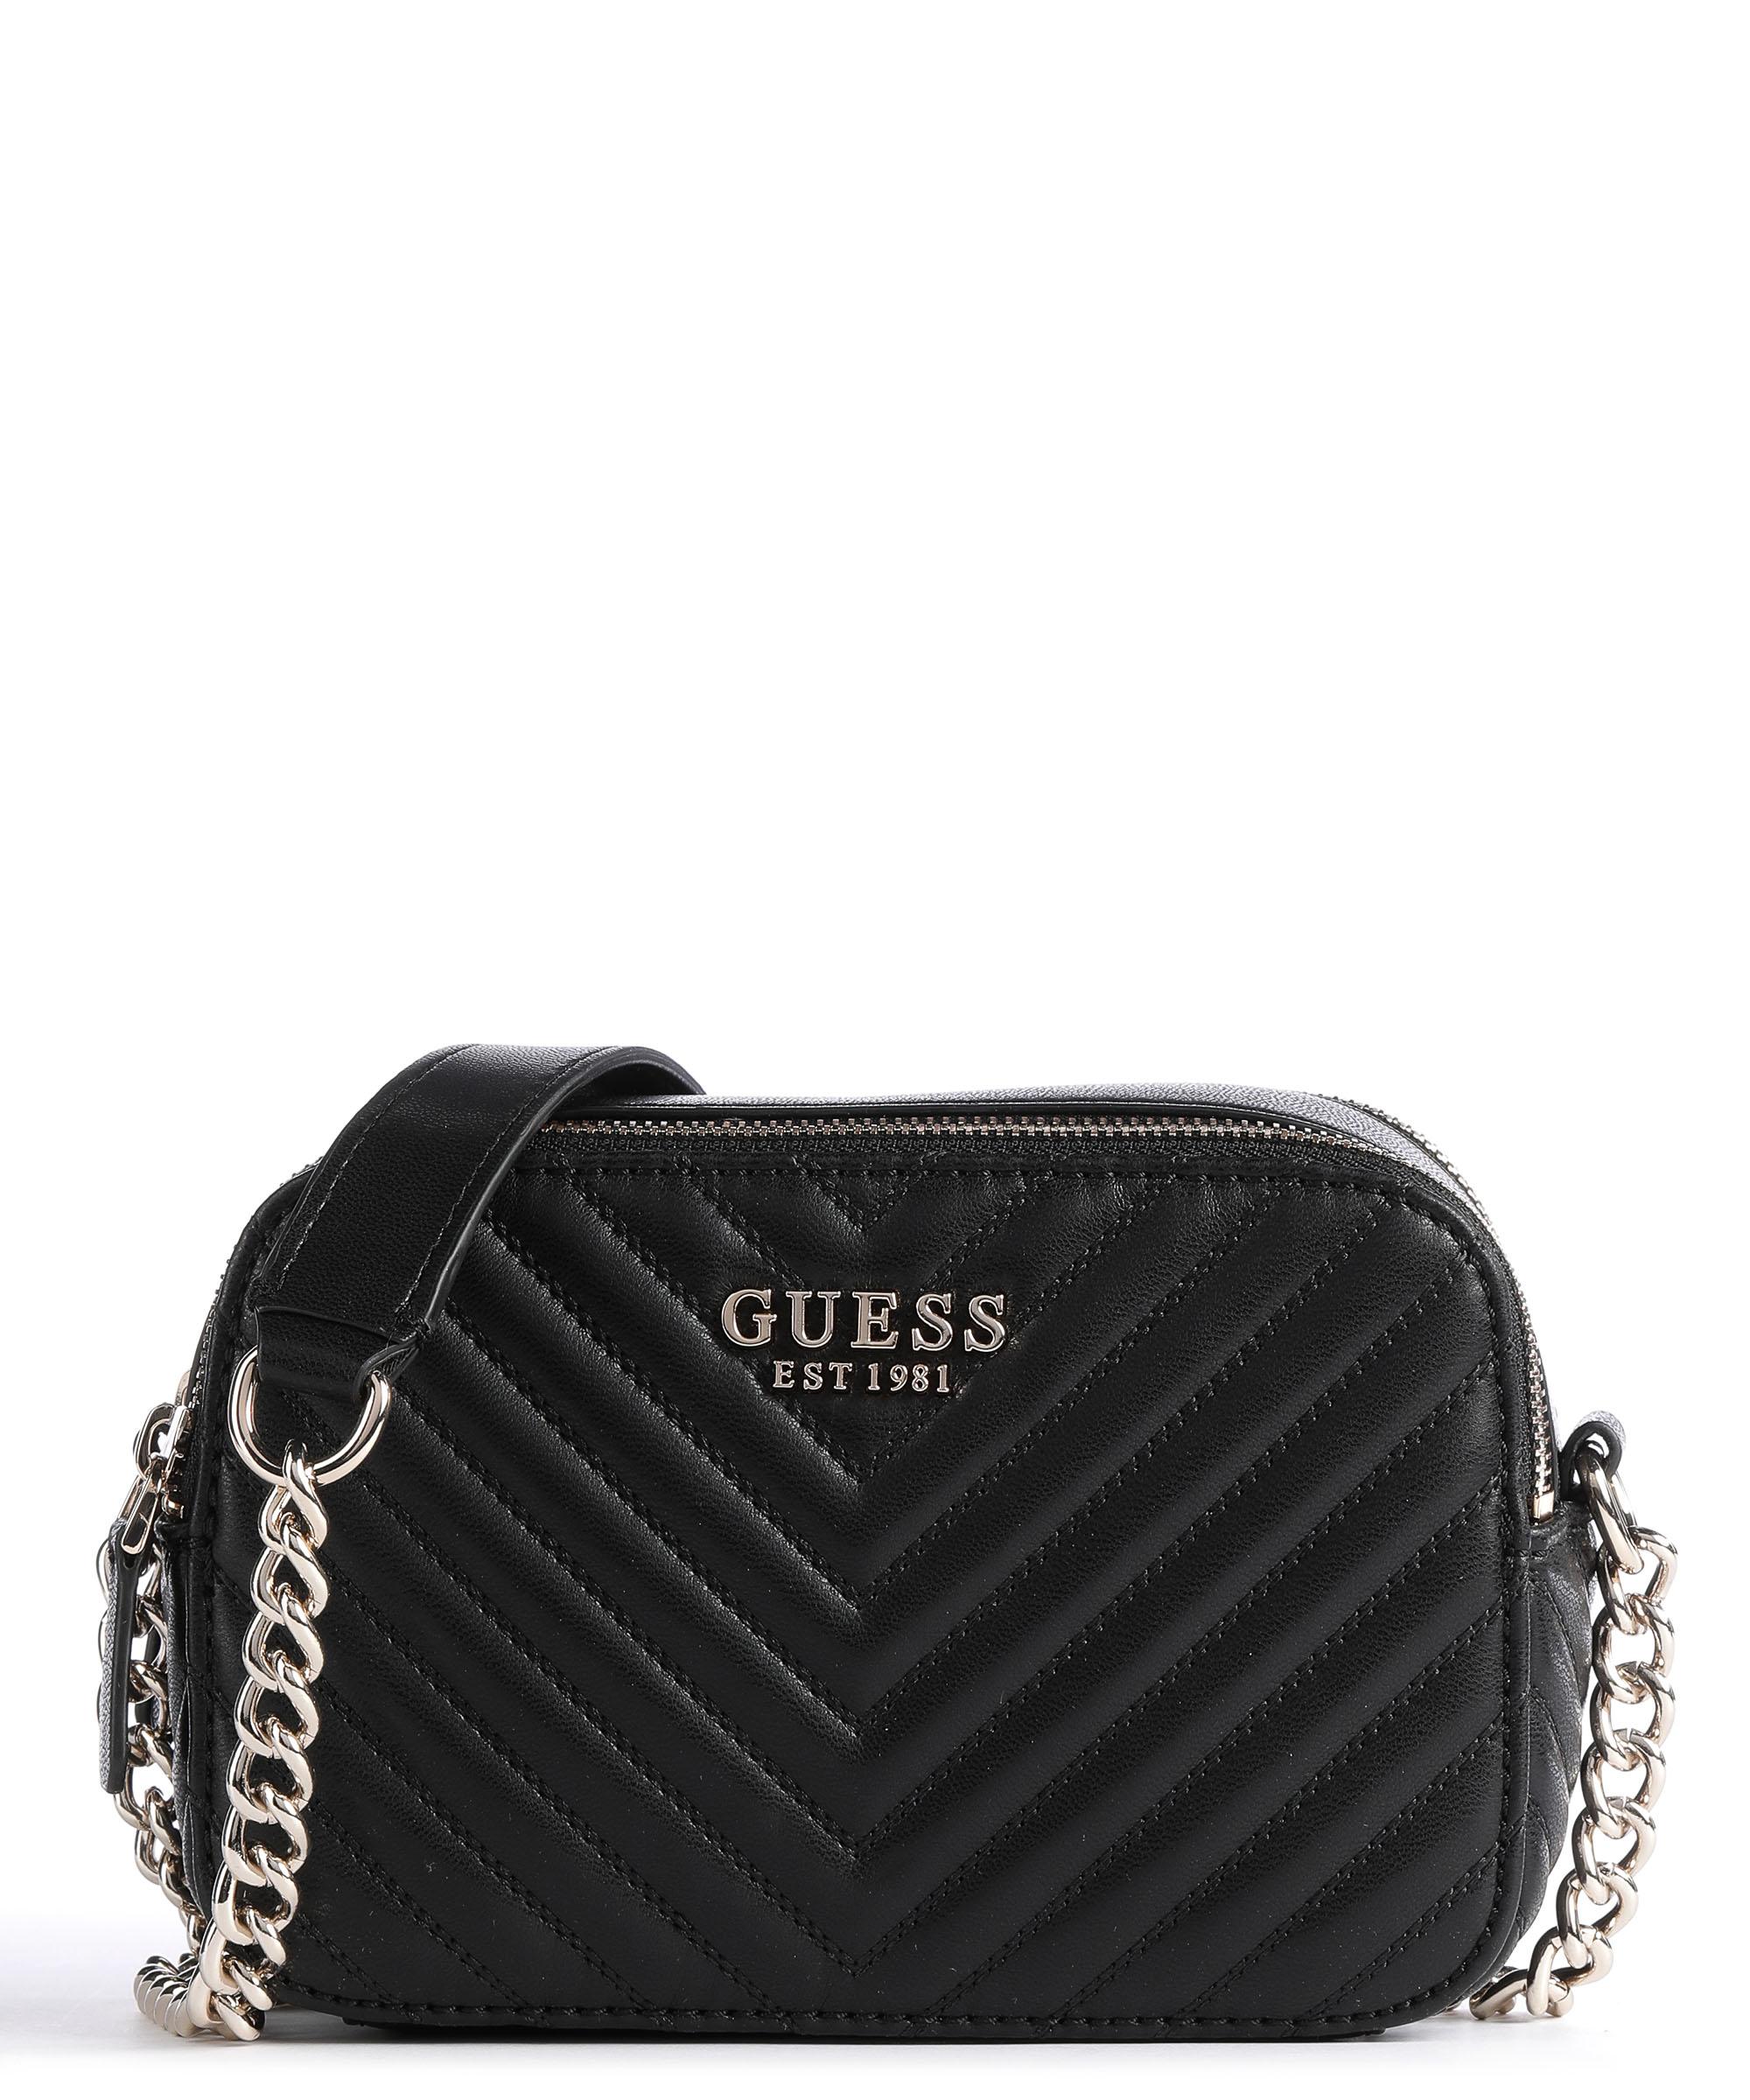 GUESS - One for me, one for you 🖤 Shop the event of the year, happening  now online & in-stores. geni.us/Nell #BlackFriday #GUESSHandbags | Facebook